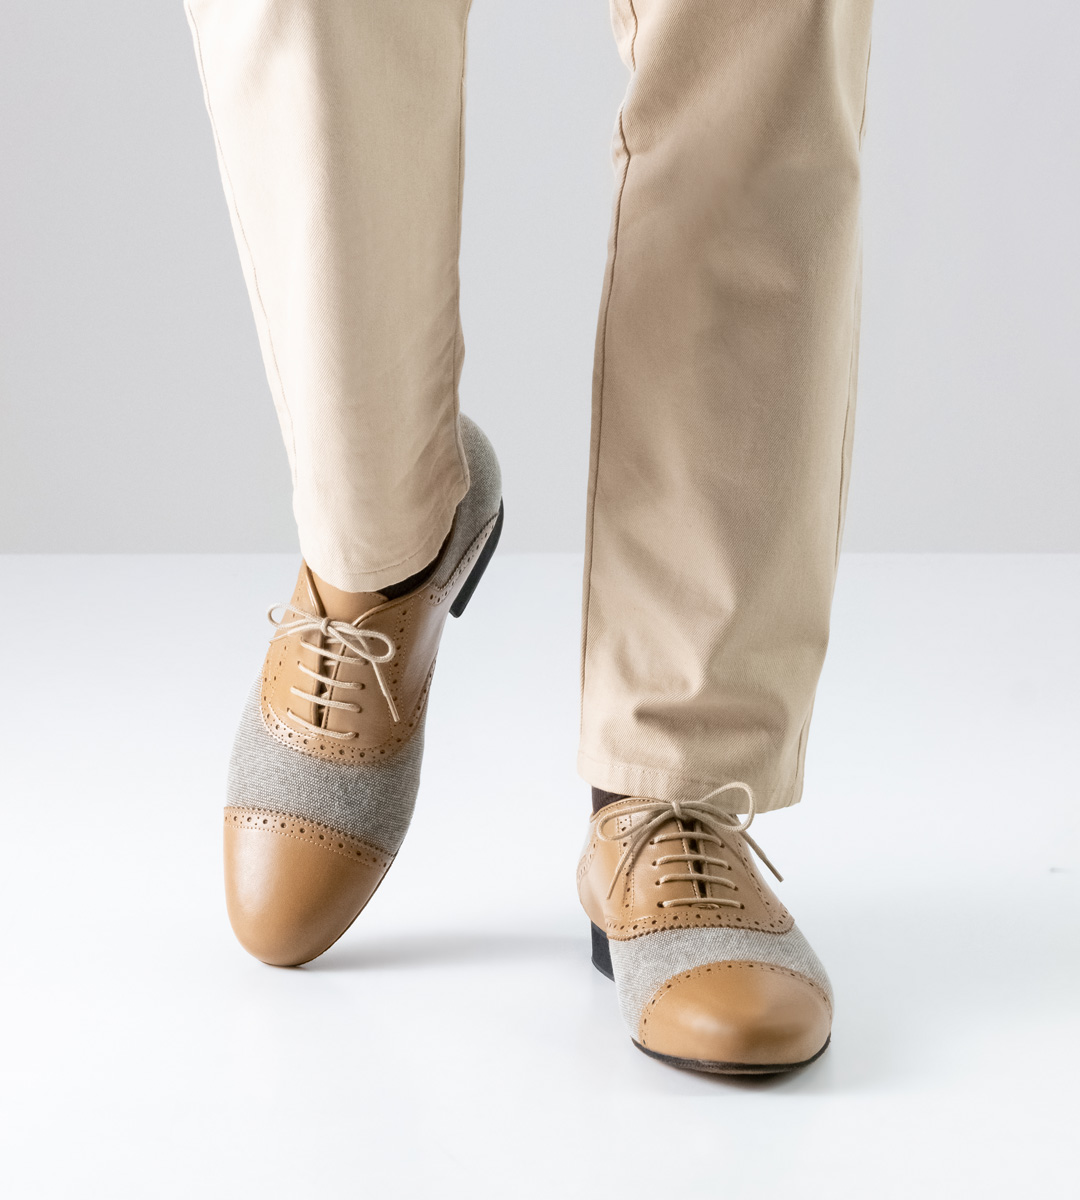 Men's dance shoe by Nueva Epoca in canvas and leather in combination with light trousers